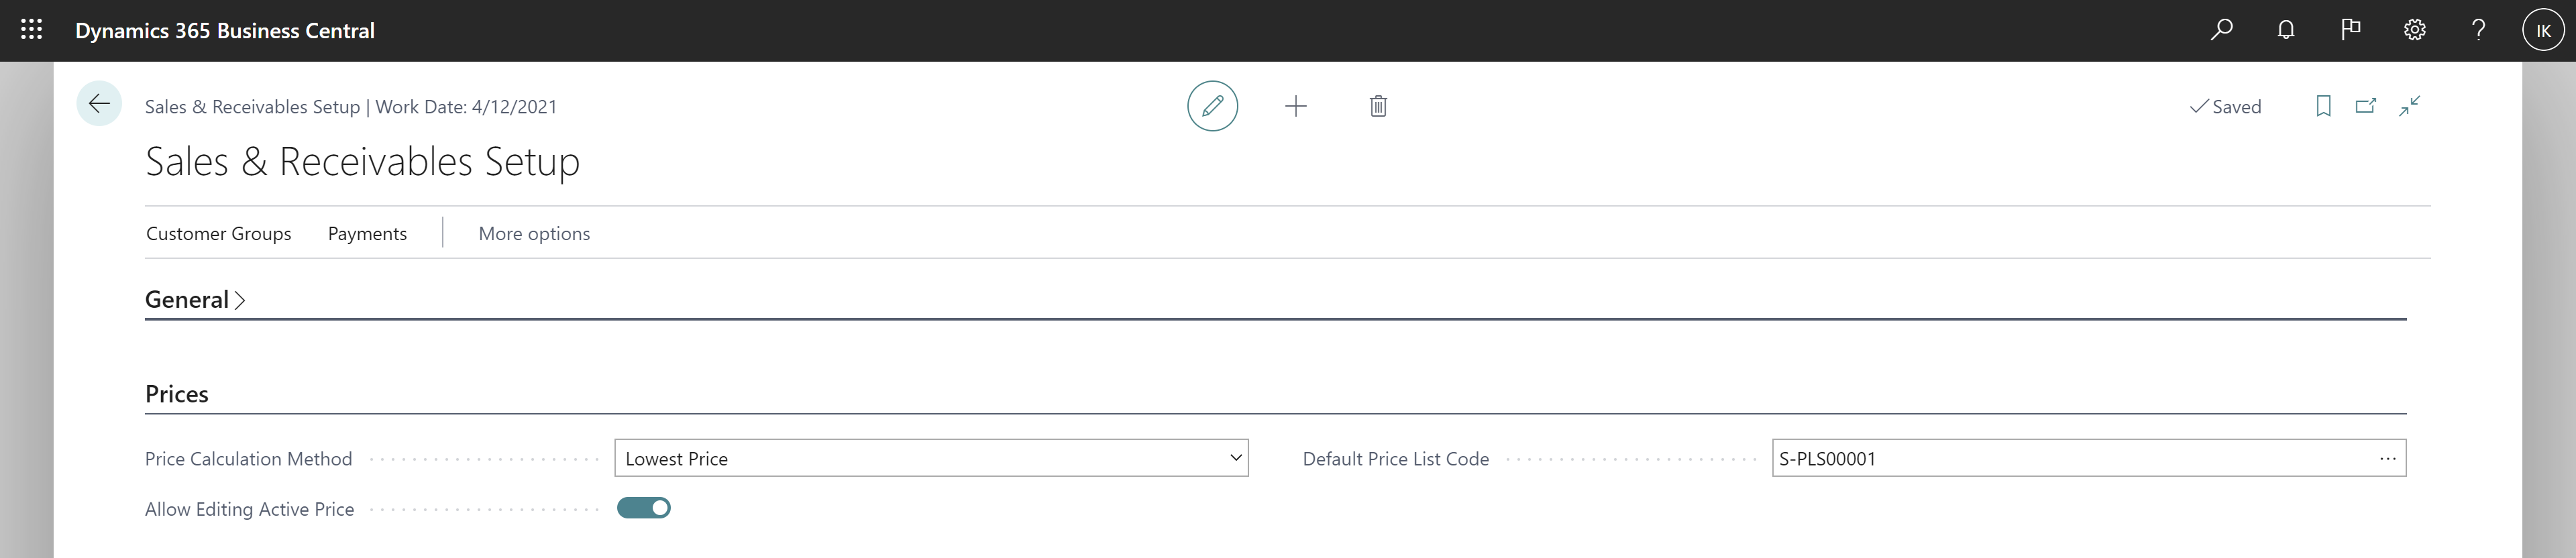 Shows Sales & Receivable Setup with default price list and Allow Editing Active Price toggle